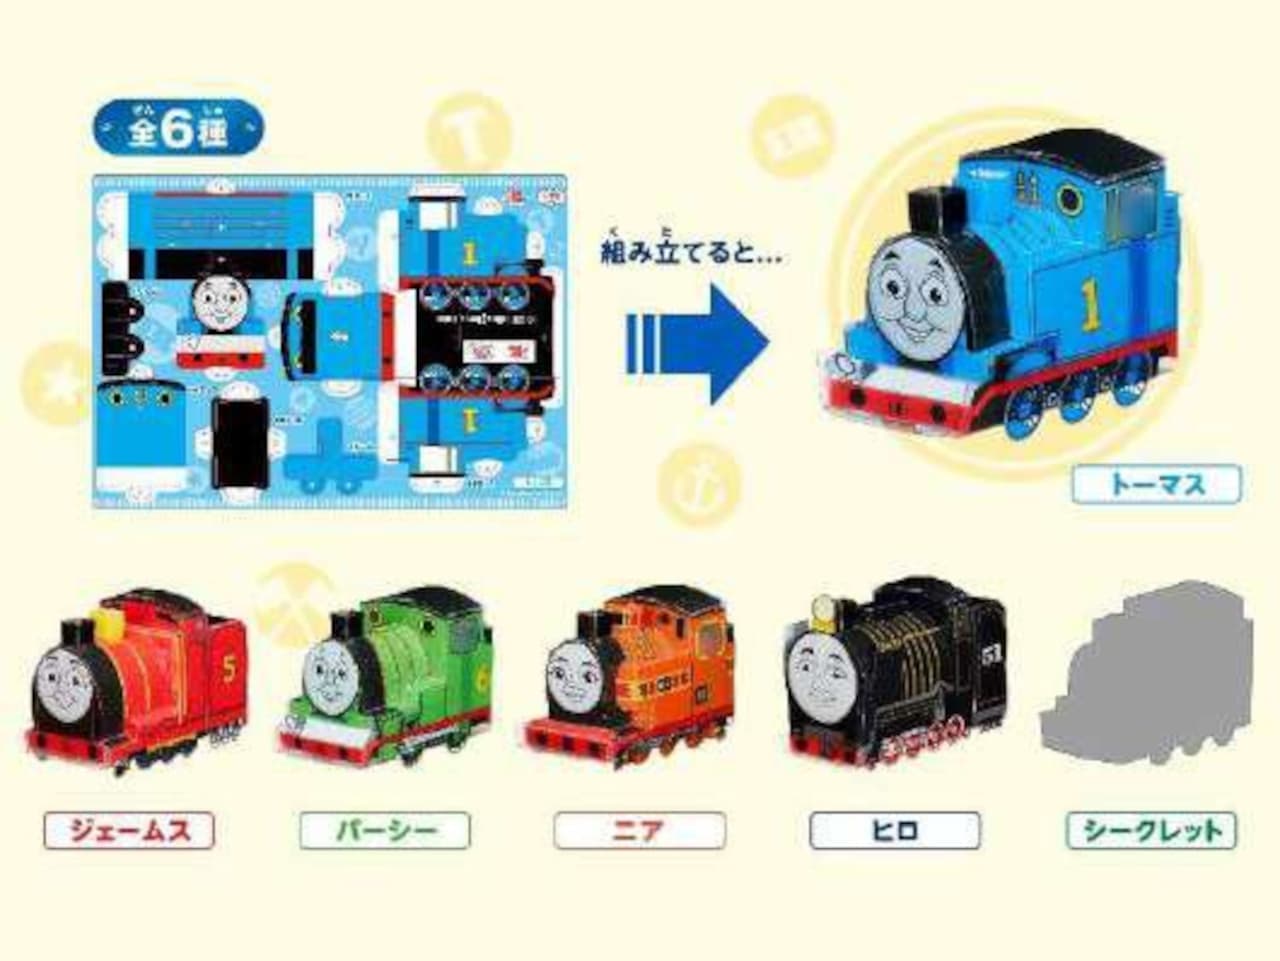 "Big Boy x Thomas the Tank Engine and Friends" Collaboration for a limited time